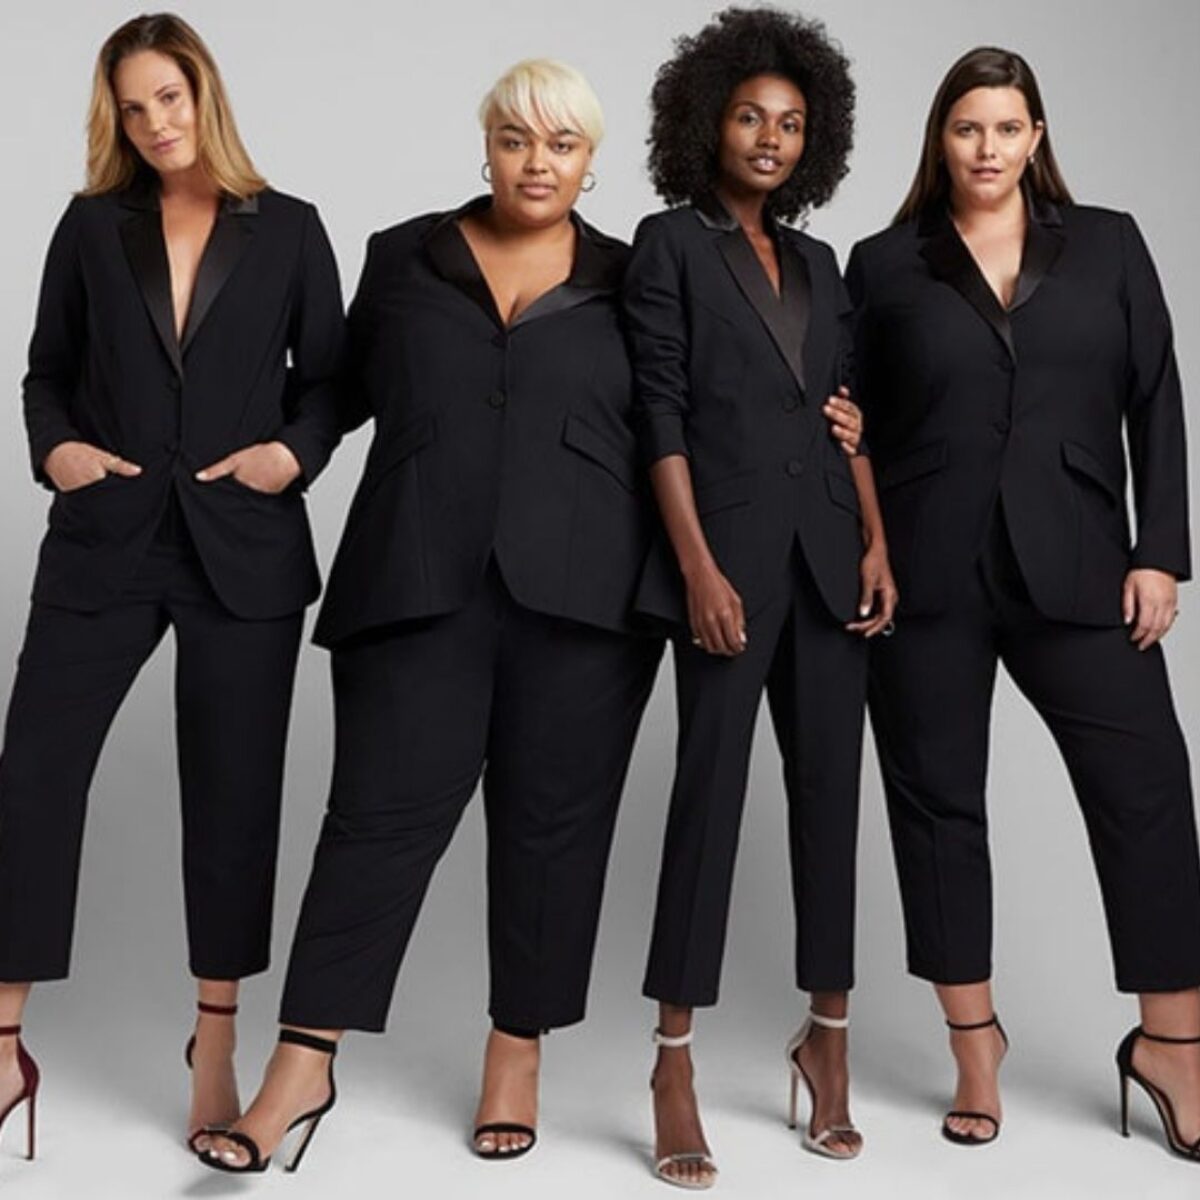 5 Online Brands With Trendy Plus Size Clothes - Society19